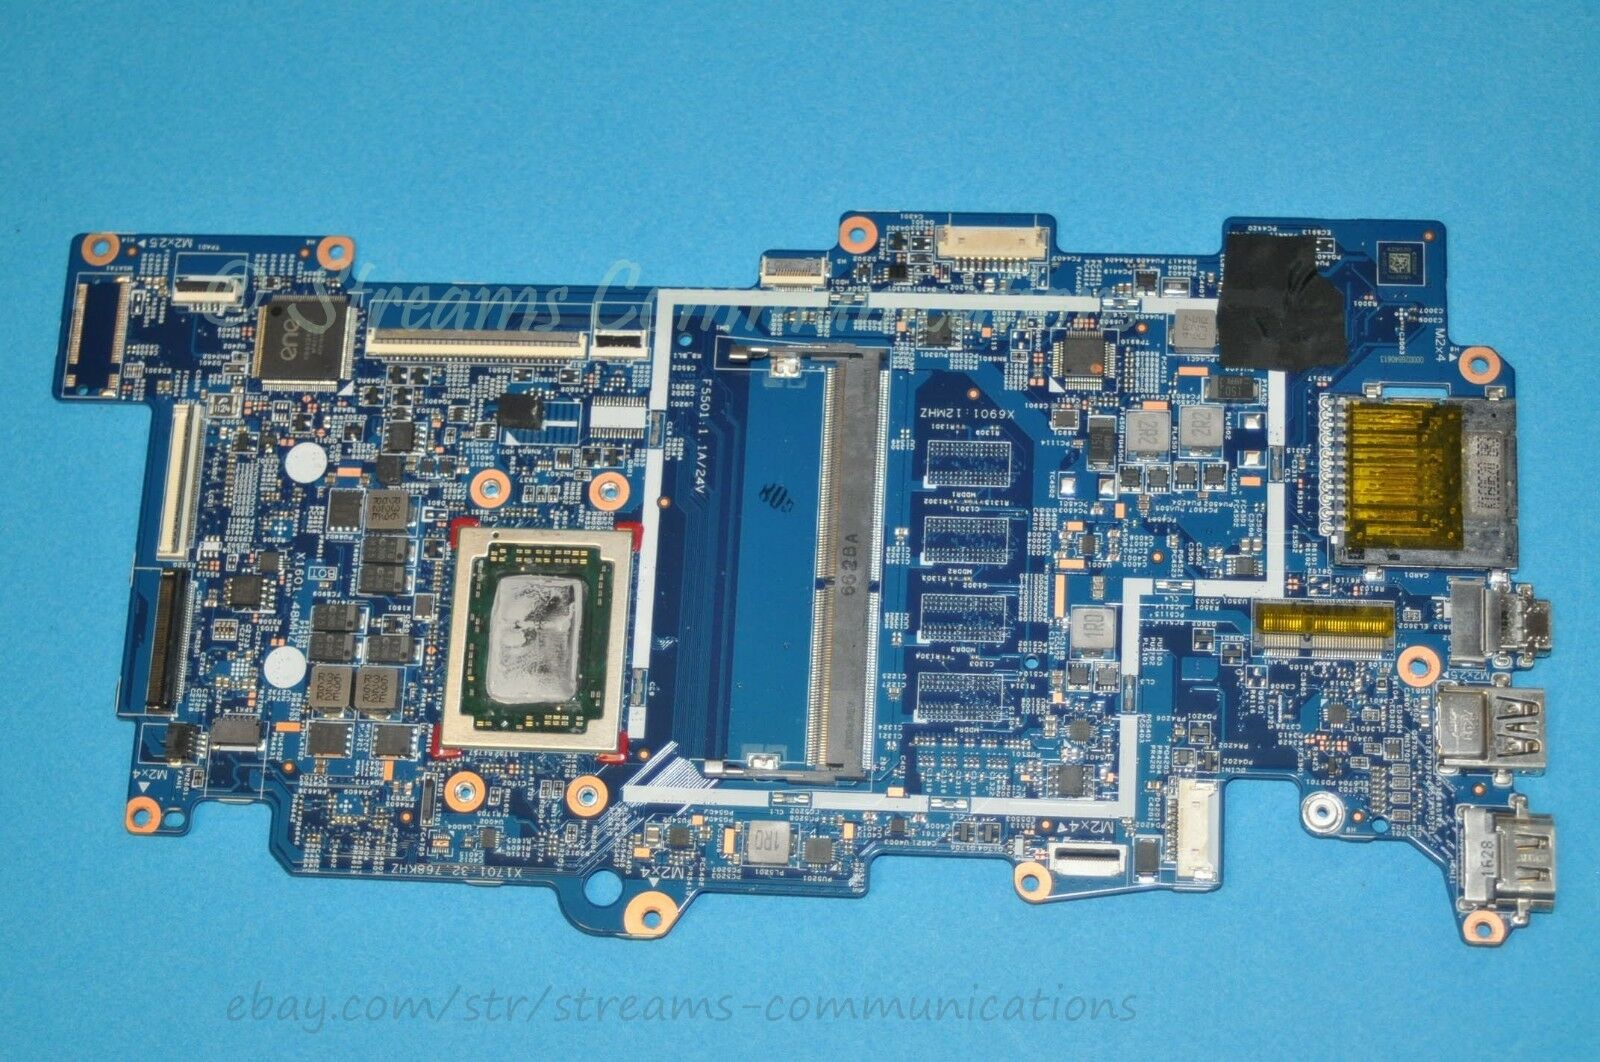 HP Envy x360 m6-ar004dx AMD FX-9800P 2.7GHz Laptop Motherboard 448.07H05.002N Compatible CPU Brand: AMD Fea